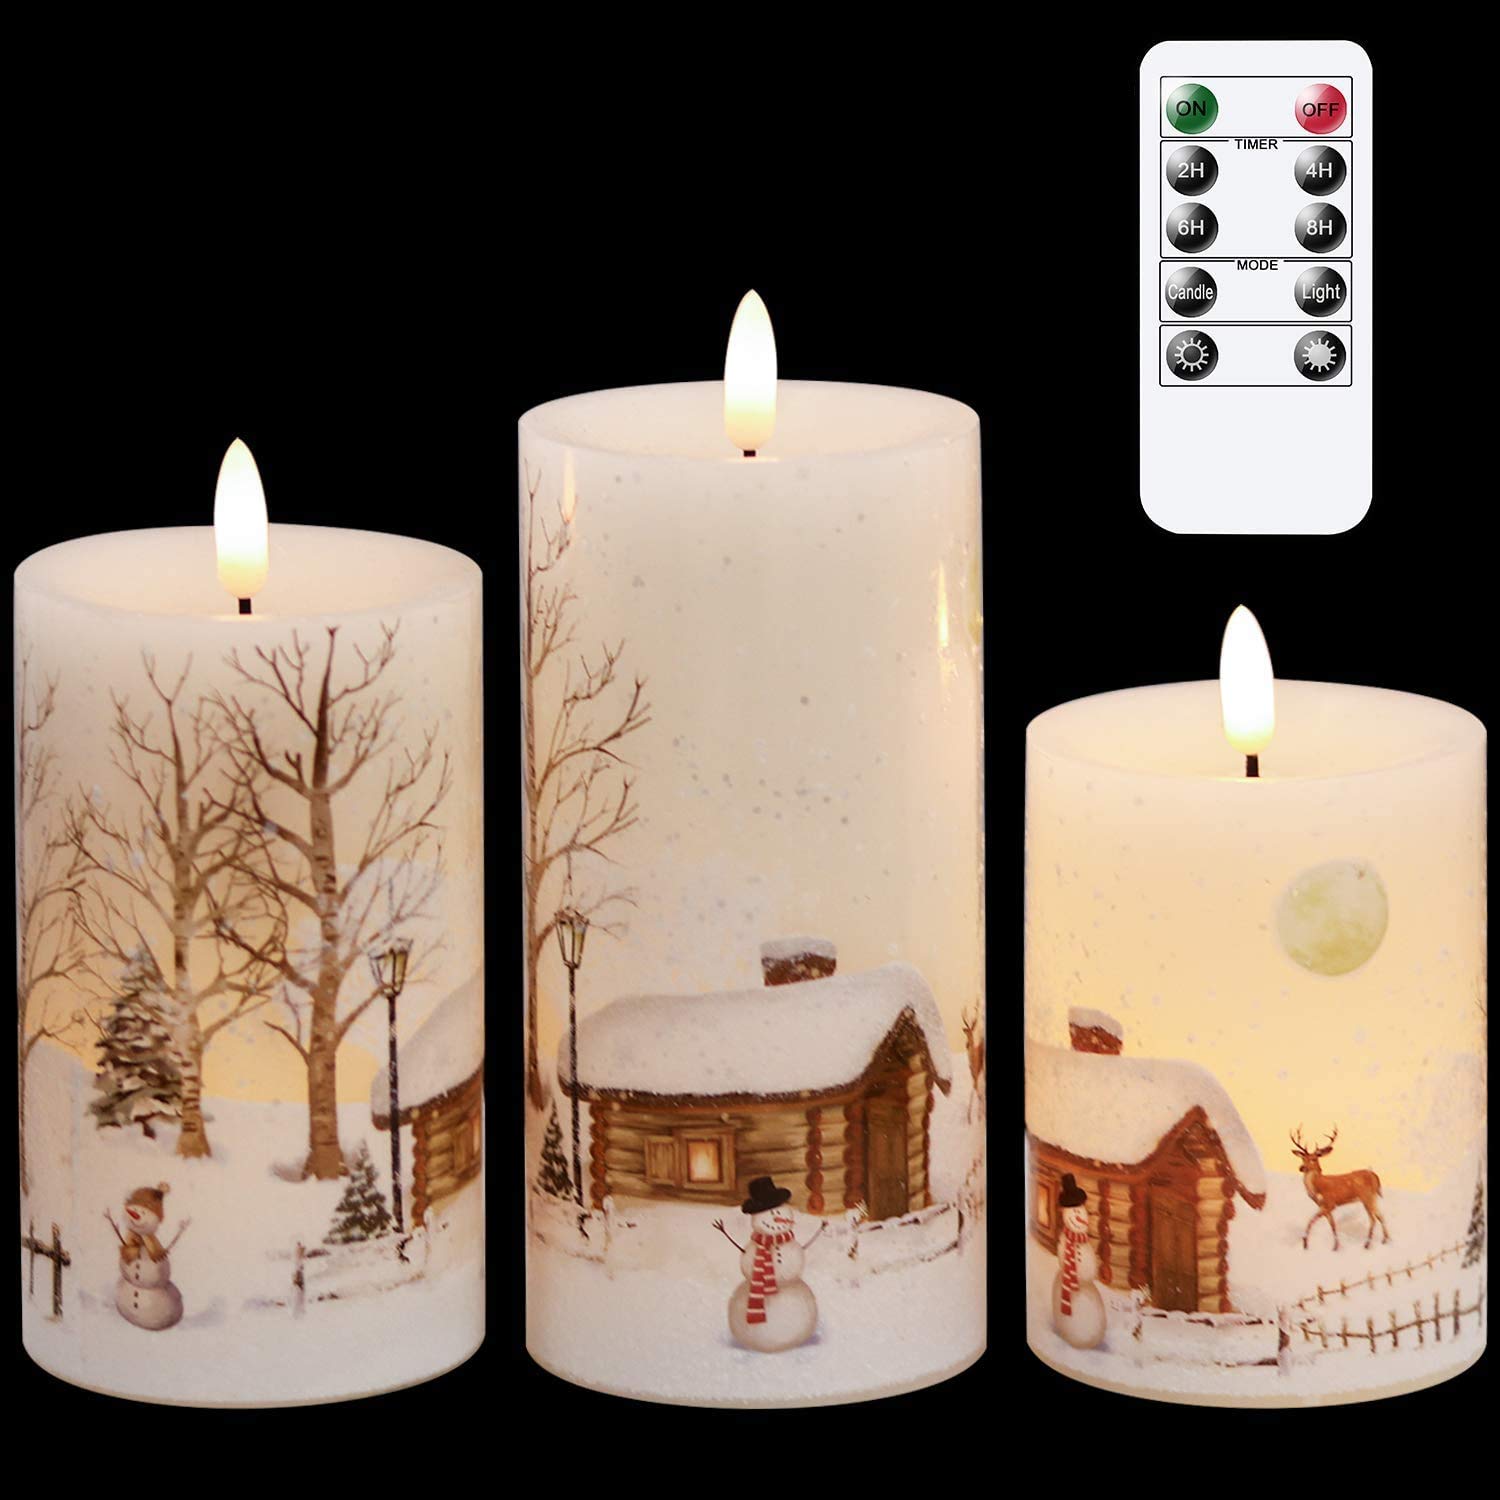 Eldnacele Flameless Flickering Christmas Snowman Fake Candles with Remote 3D Wick Snow Scene Decal Real Wax Candles Lights Led Flames for Christmas Home Decoration Powered by 2 AA Batteries, 3 Pack